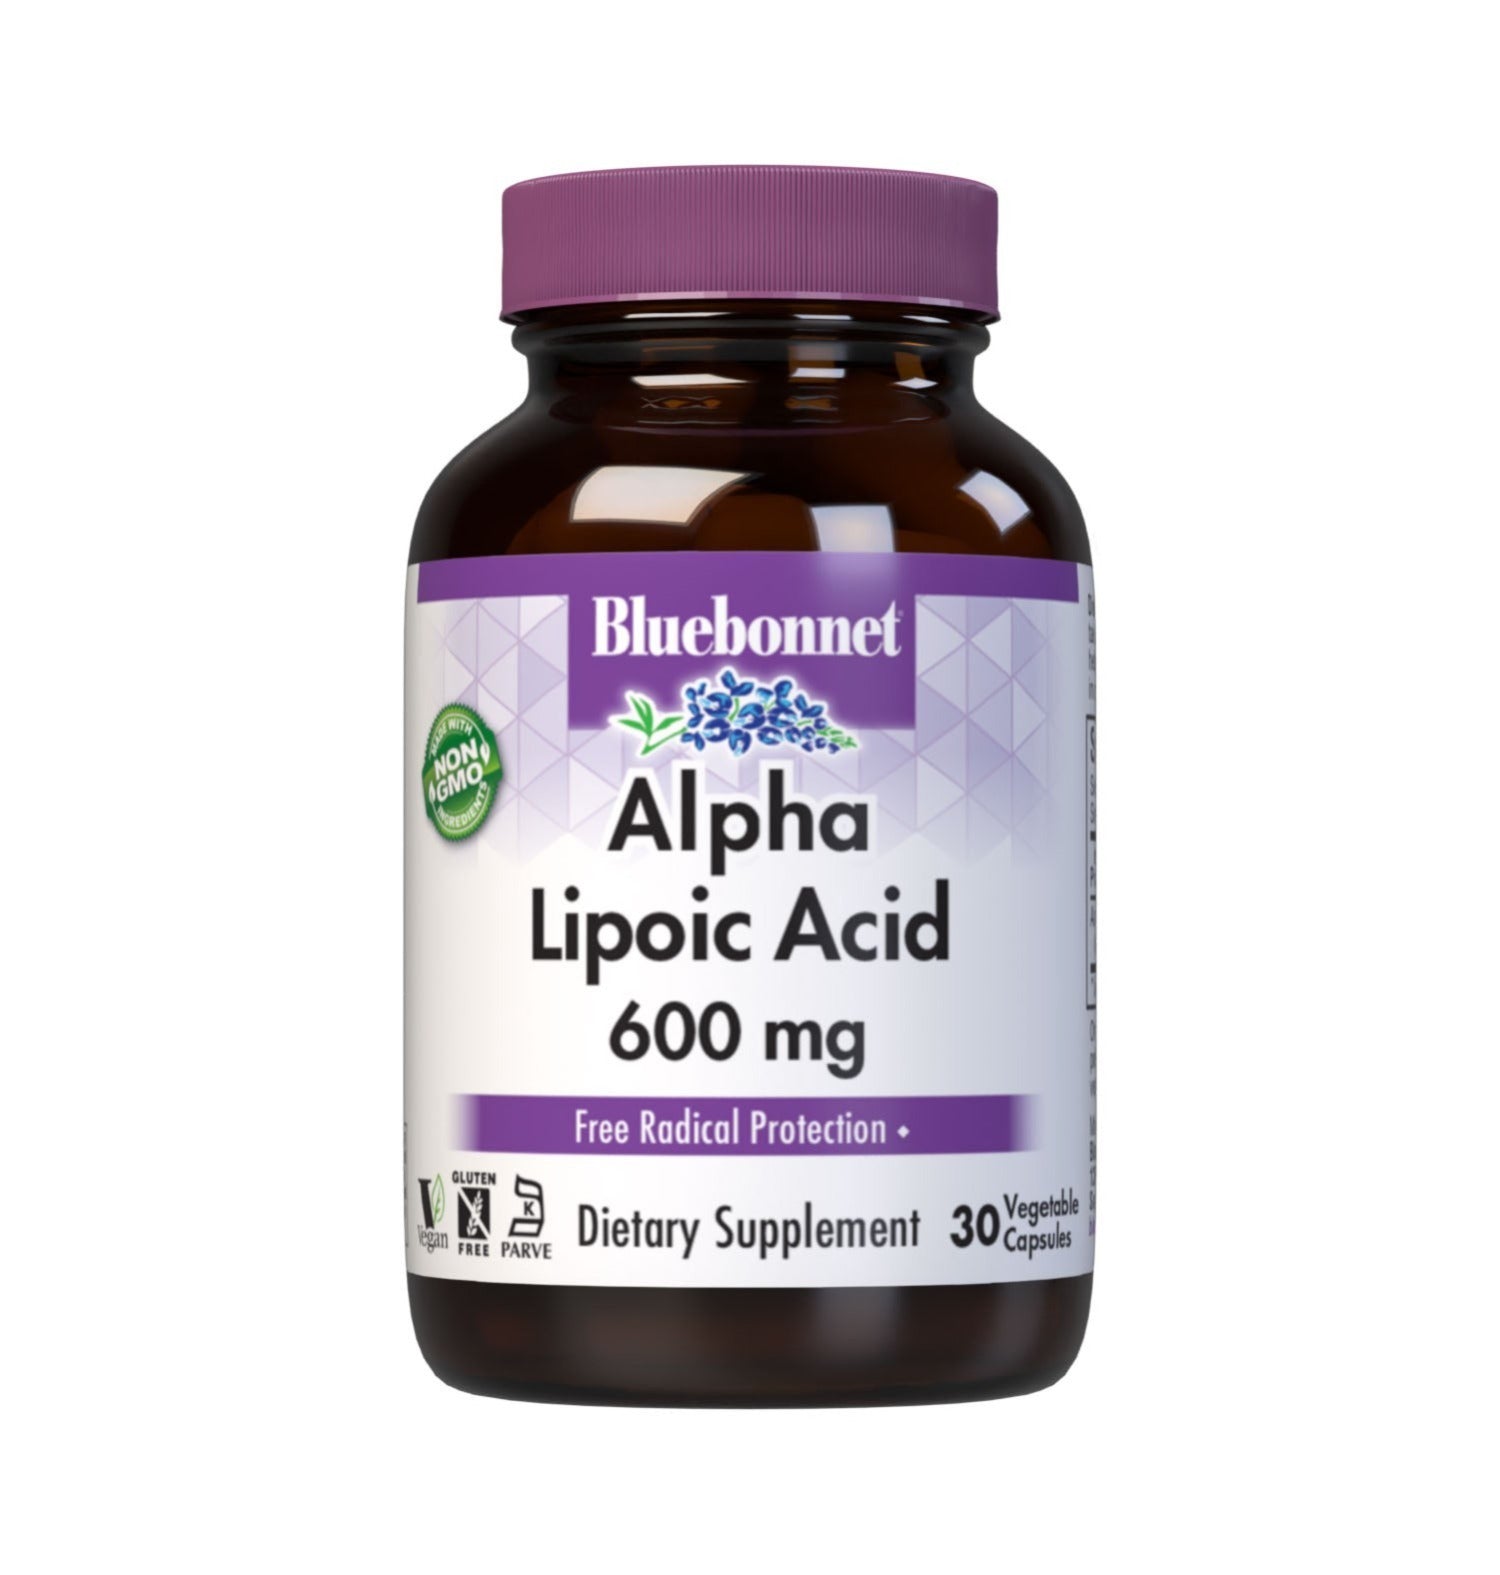 Bluebonnet’s Alpha Lipoic Acid 600 mg 30 Vegetable Capsules are formulated with alpha lipoic acid in its crystalline form. Alpha lipoic acid is a unique antioxidant that is both fat-soluble and water-soluble, and is known for its free radical scavenger activity. #size_30 count